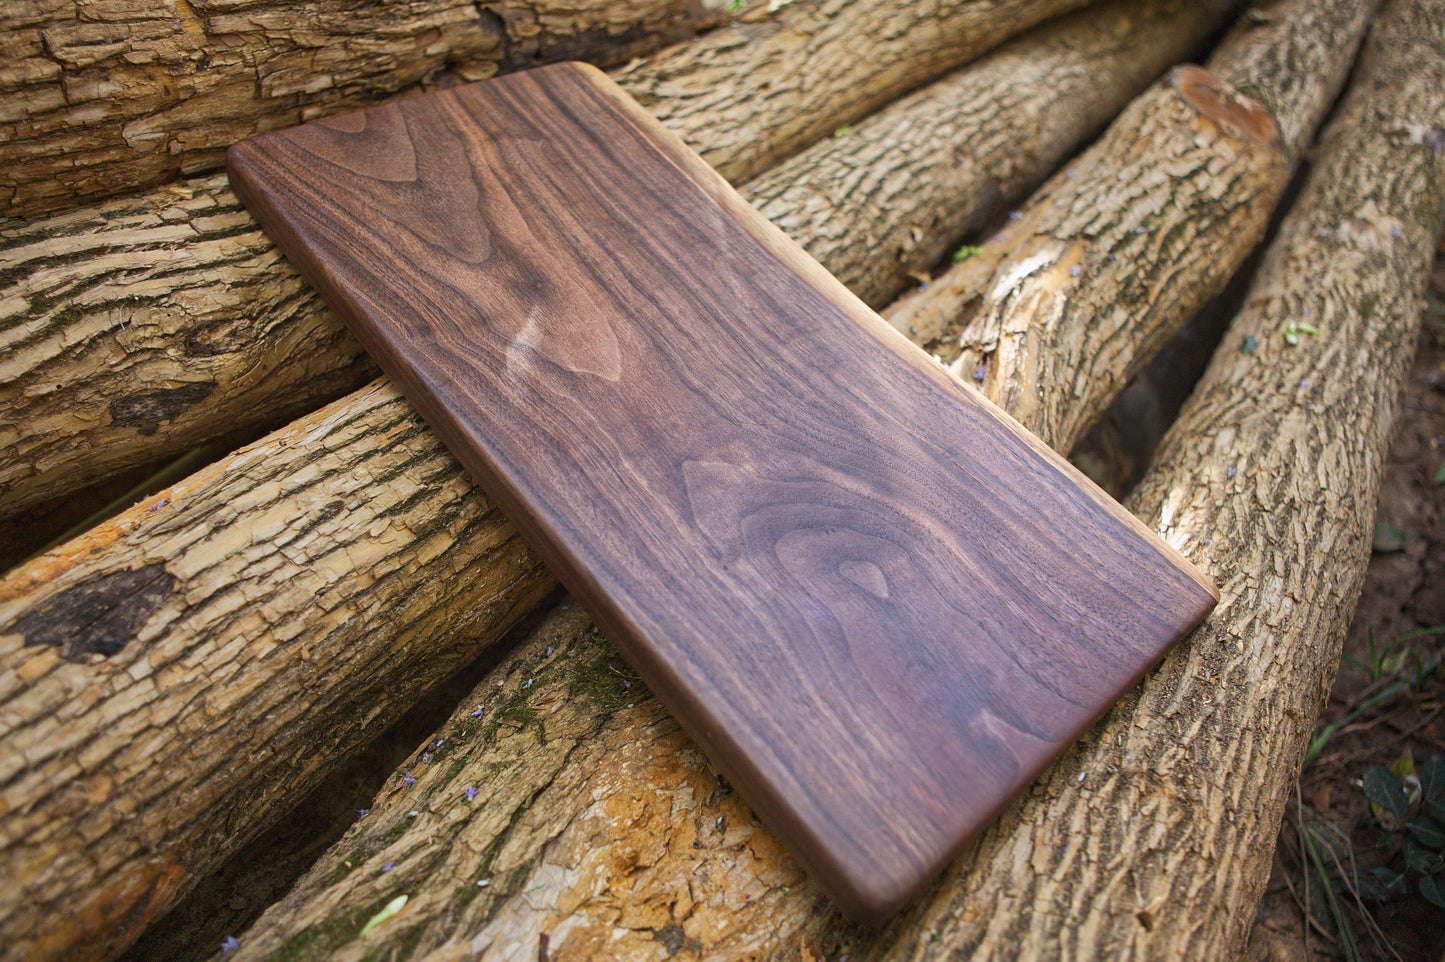 THE SHARK: Unique Live Edge Walnut Charcuterie Board - Rustic Elegance with a Wild Twist for Gourmet Display